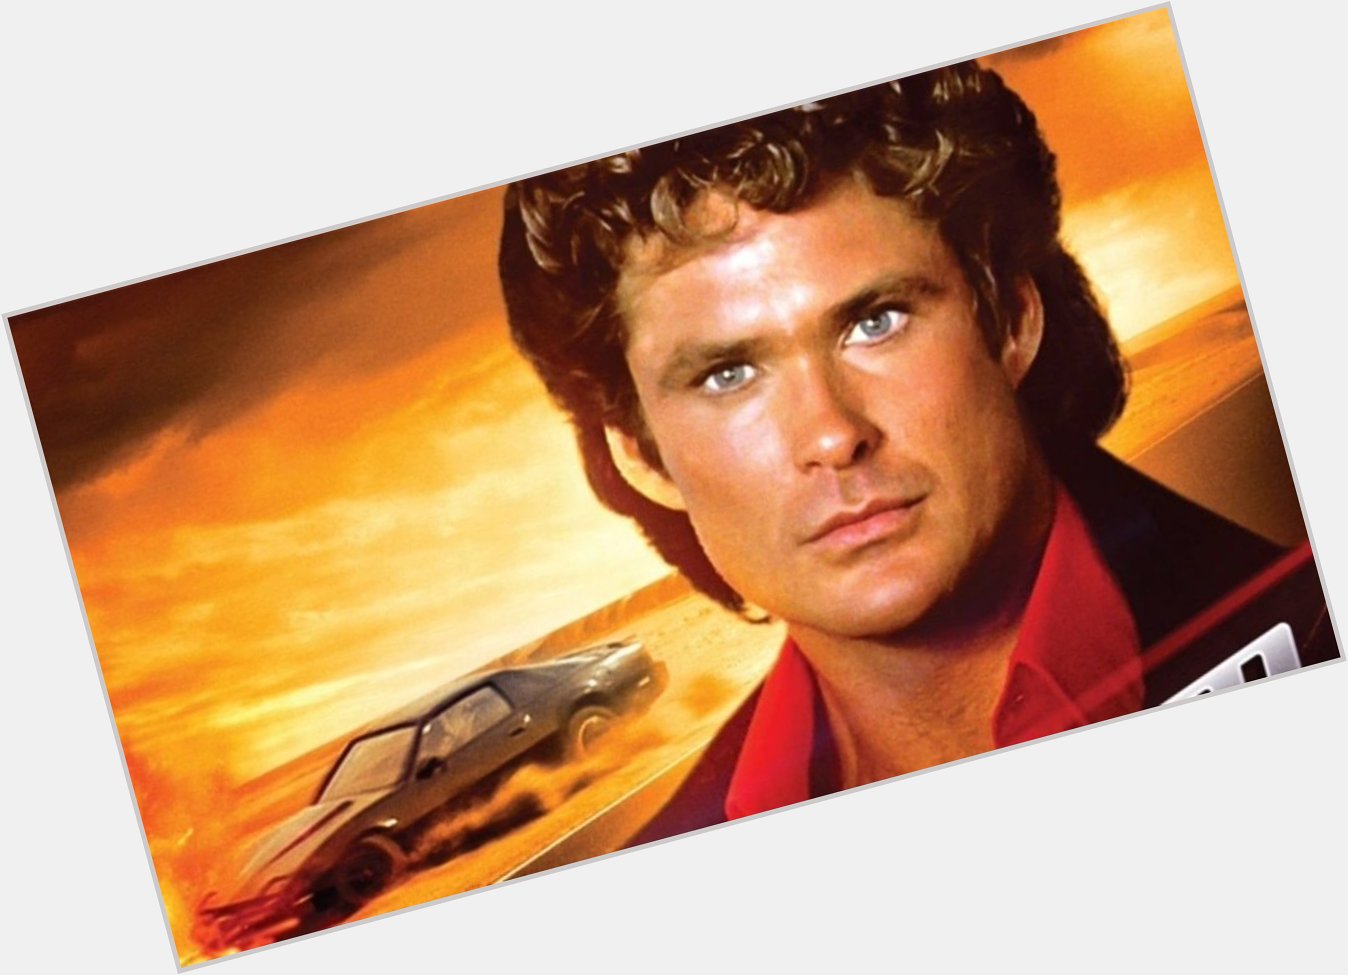 Who remember the Bay Watch dude? Well, let\s wish him a very Happy Birthday!!
Happy Birthday David Hasselhoff 